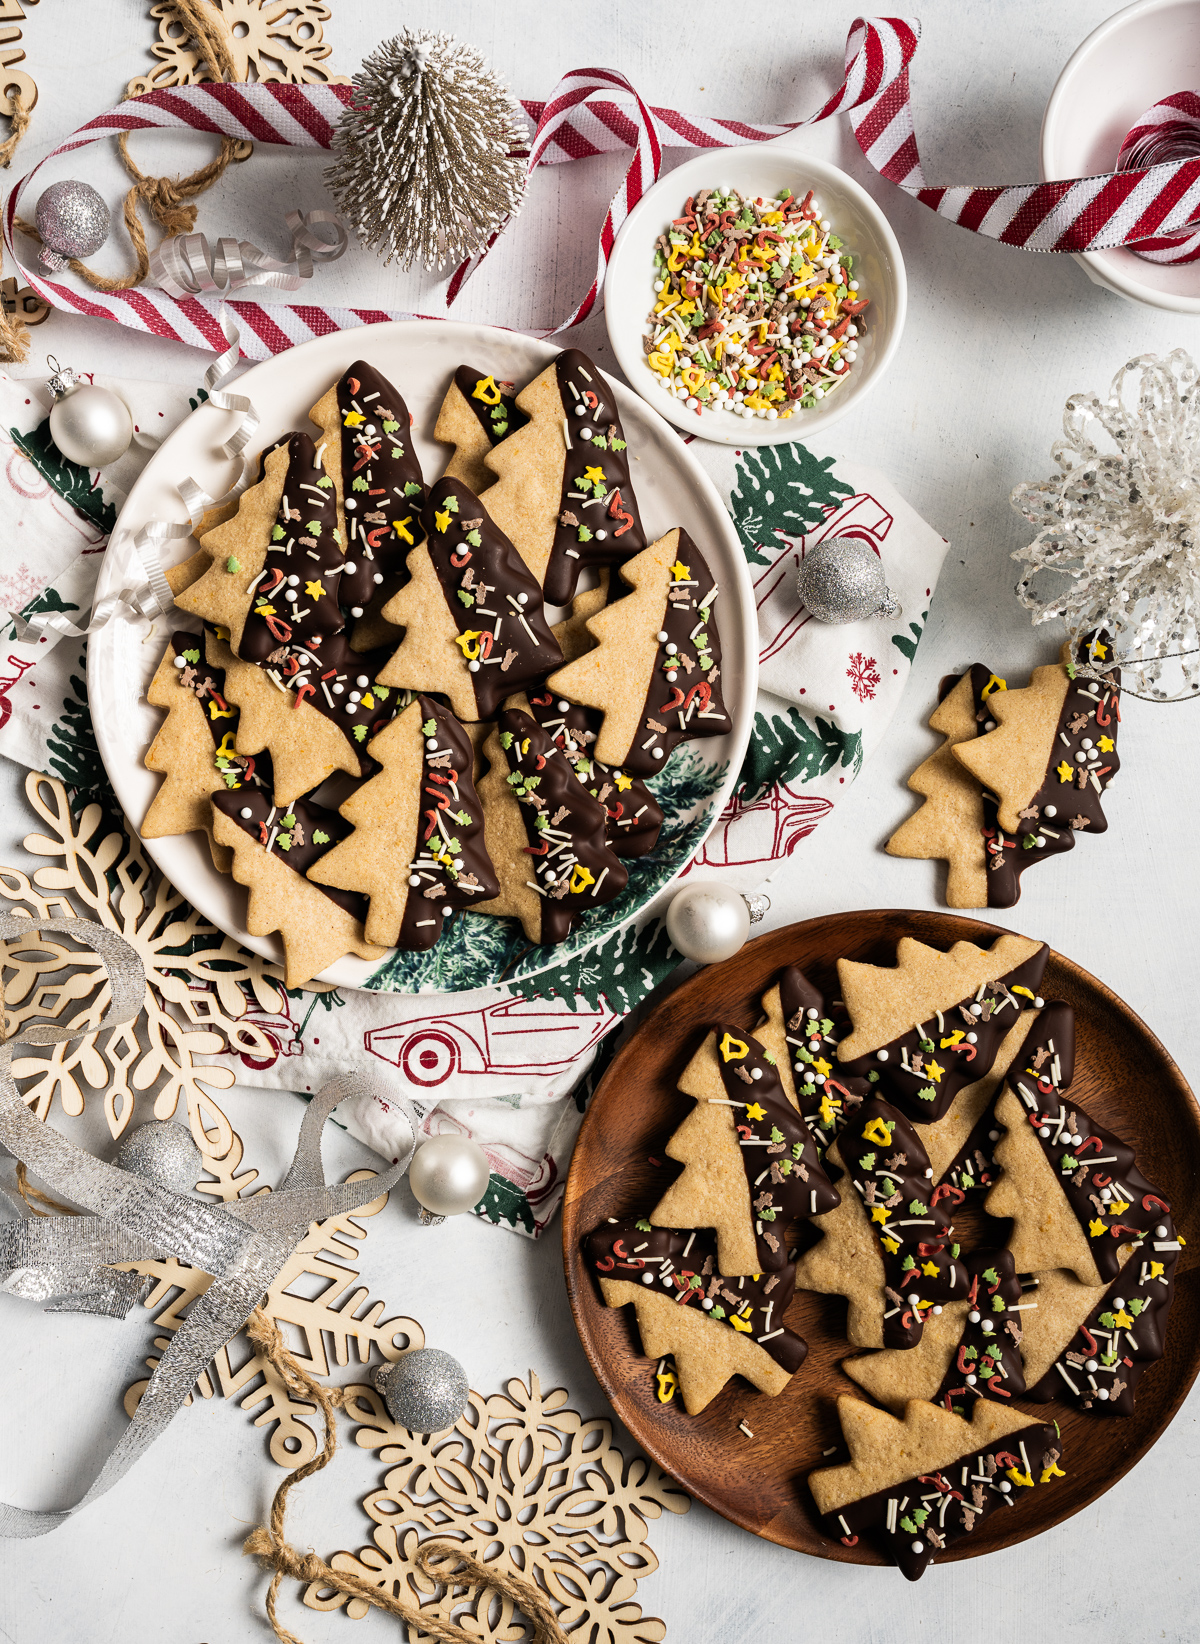 tree shaped cookies half dipped in chocolate with sprinkles bowl of sprinkles ornaments red and white striped ribbon